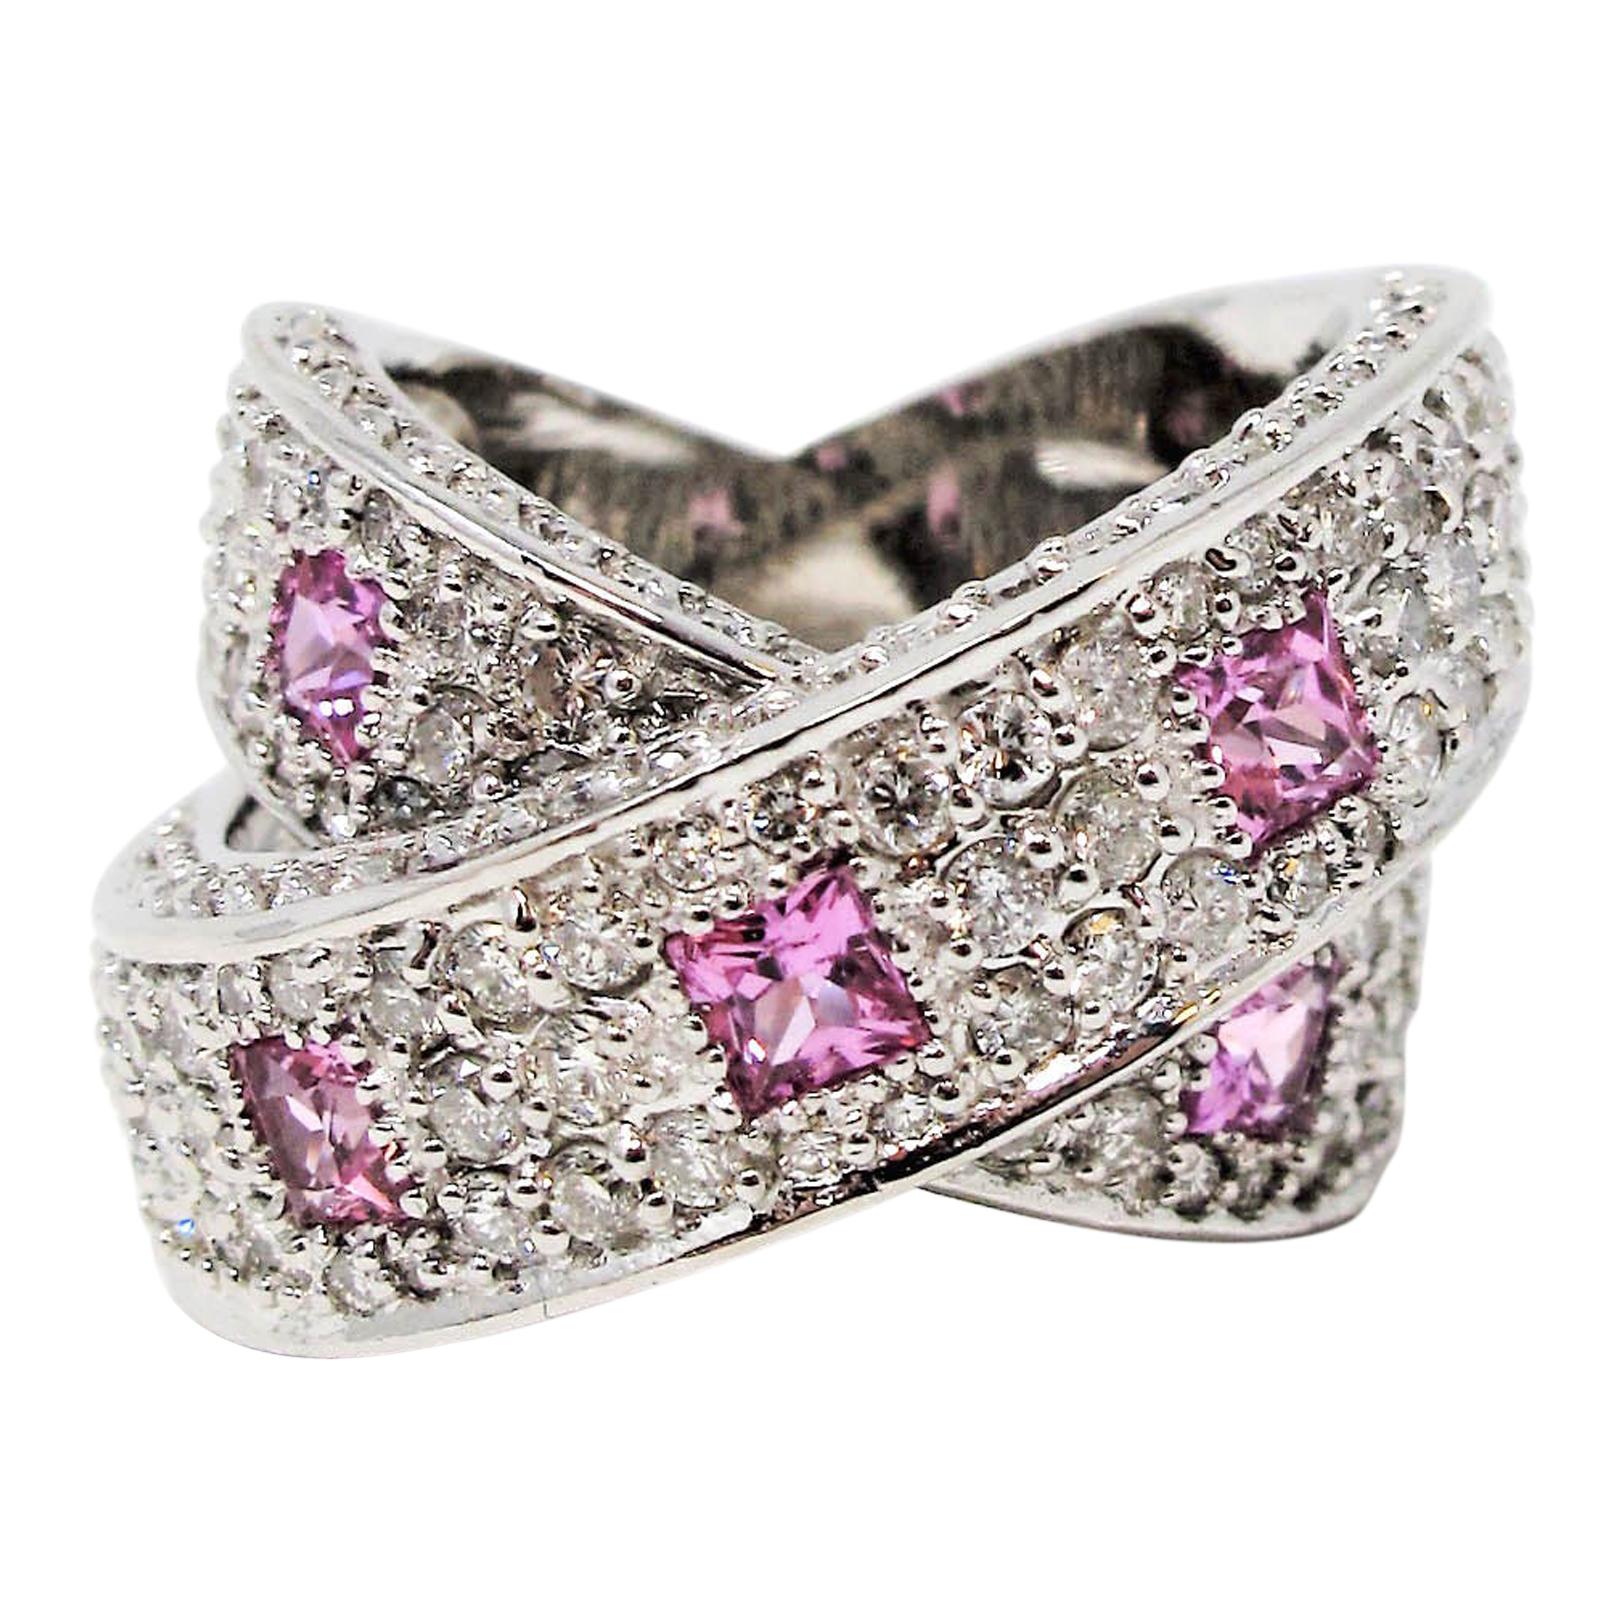 3.83 Carats Pave Diamond and Pink Sapphire Crossover Band Ring 14 Karat Gold